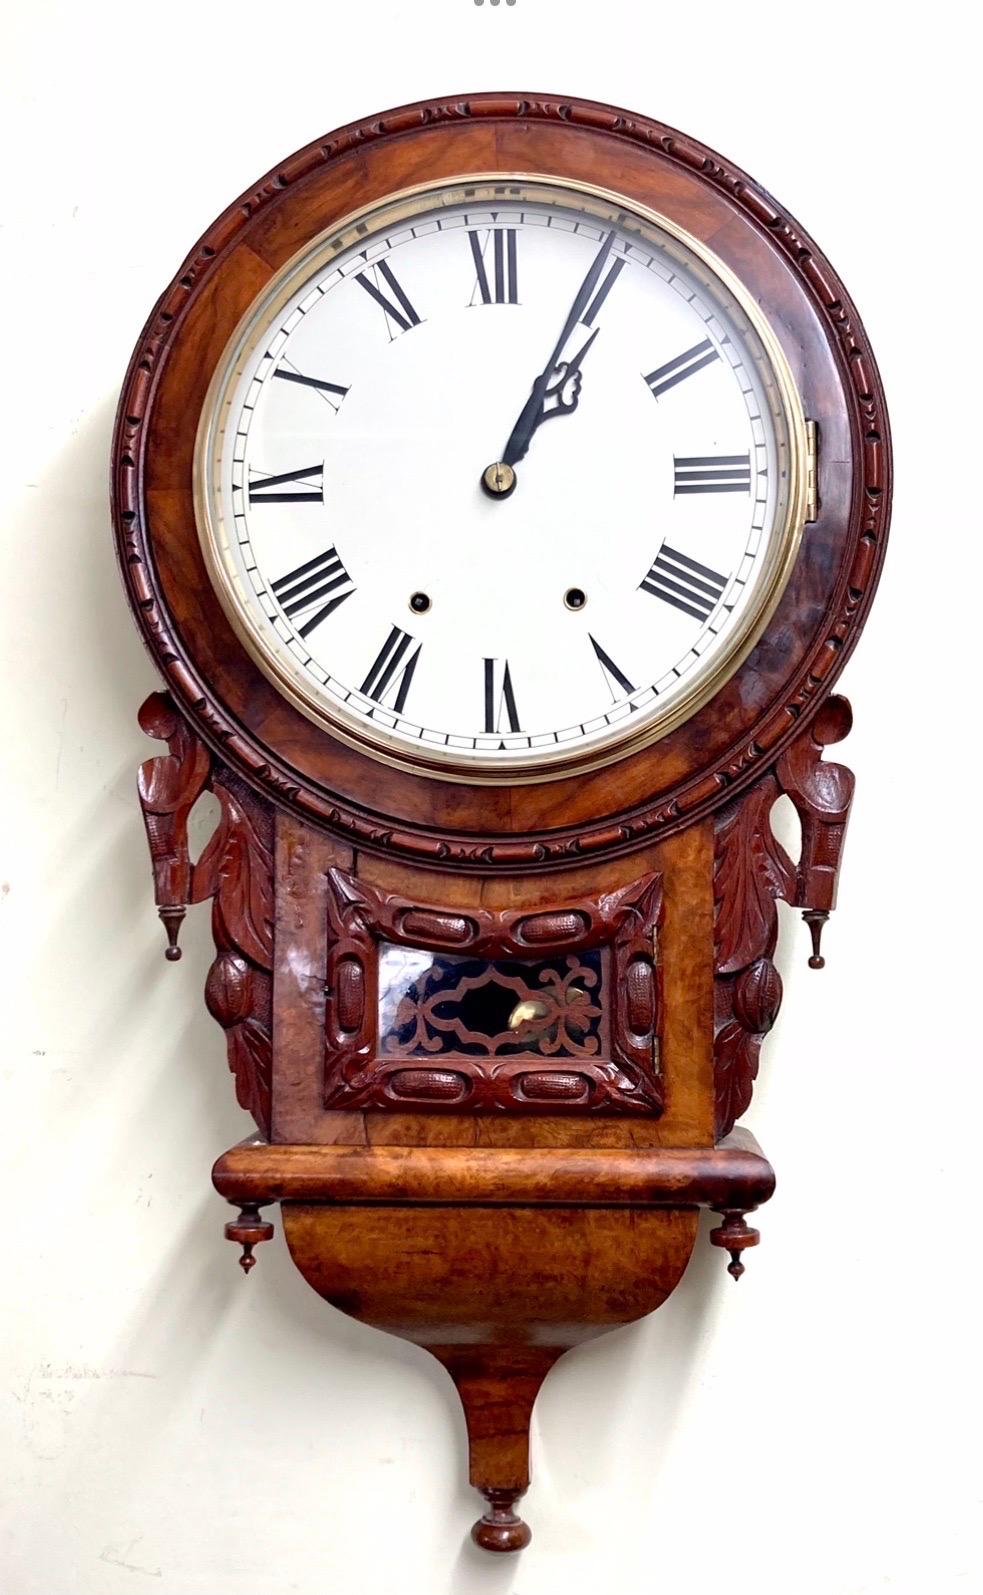 Beautifully shaped and rare antique burr walnut drop dial wall clock
Striking hourly on bell.
{8day}
This is a superb antique walnut drop dial wall clock with beautiful case with scroll design bottom, original 8 day twin train striking movement